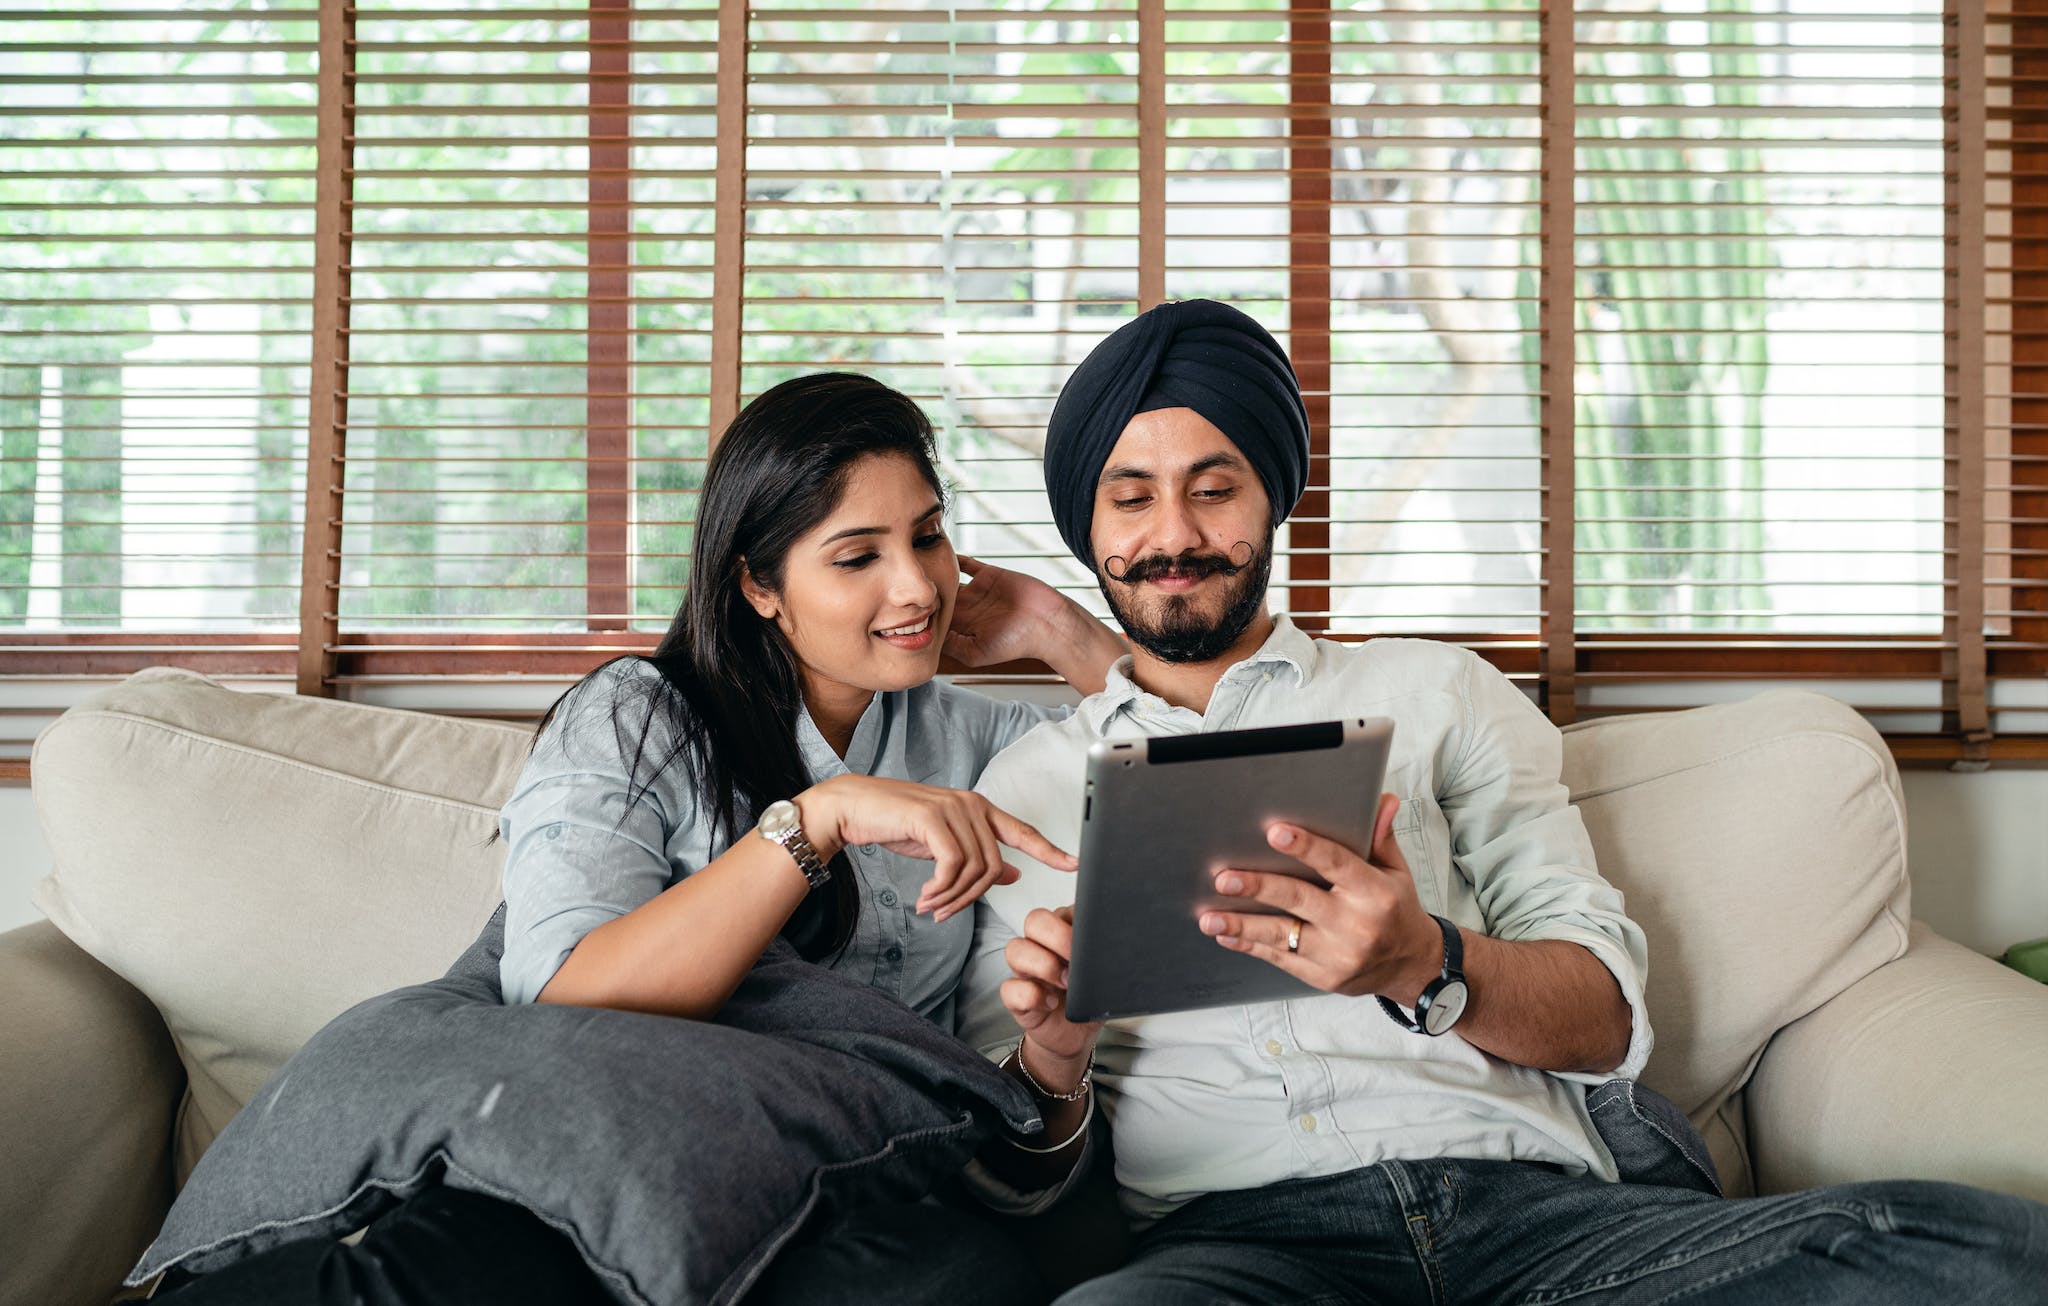 Content Indian woman and man in turban resting on cozy couch in living room and sharing tablet